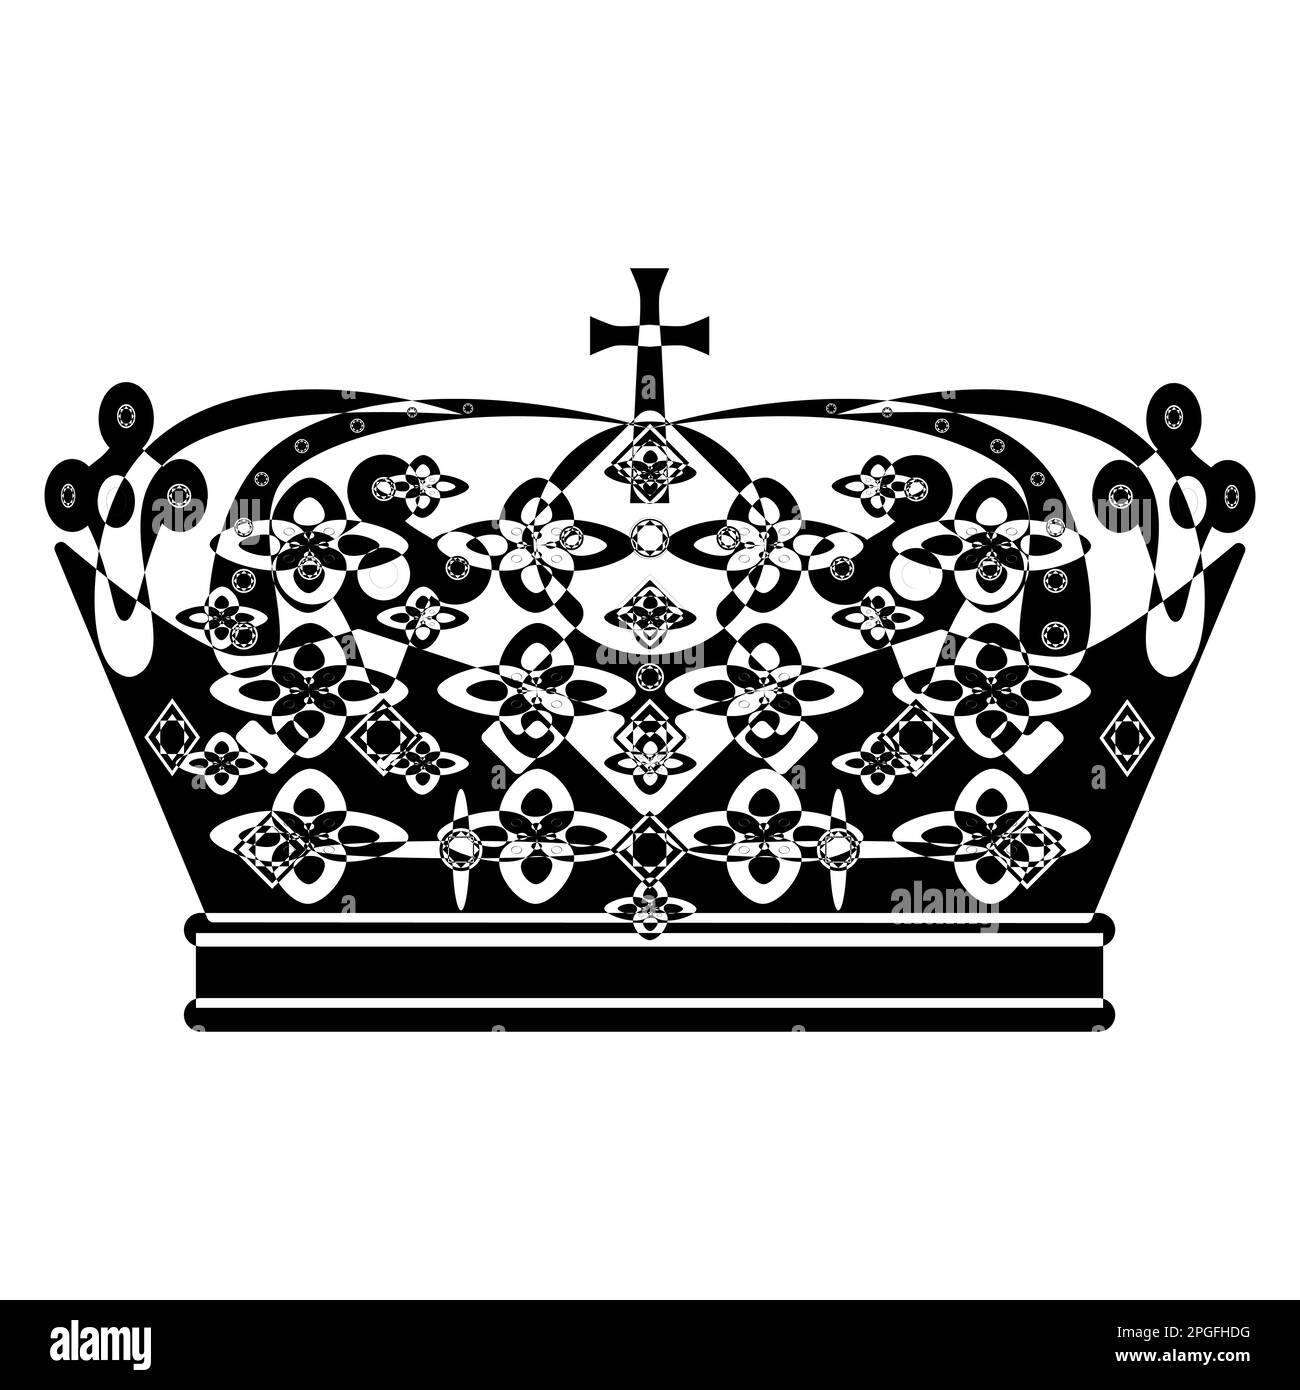 Crown in Lineart style. Classic royal symbol. Outline vector illustration isolated on white background. Stock Vector